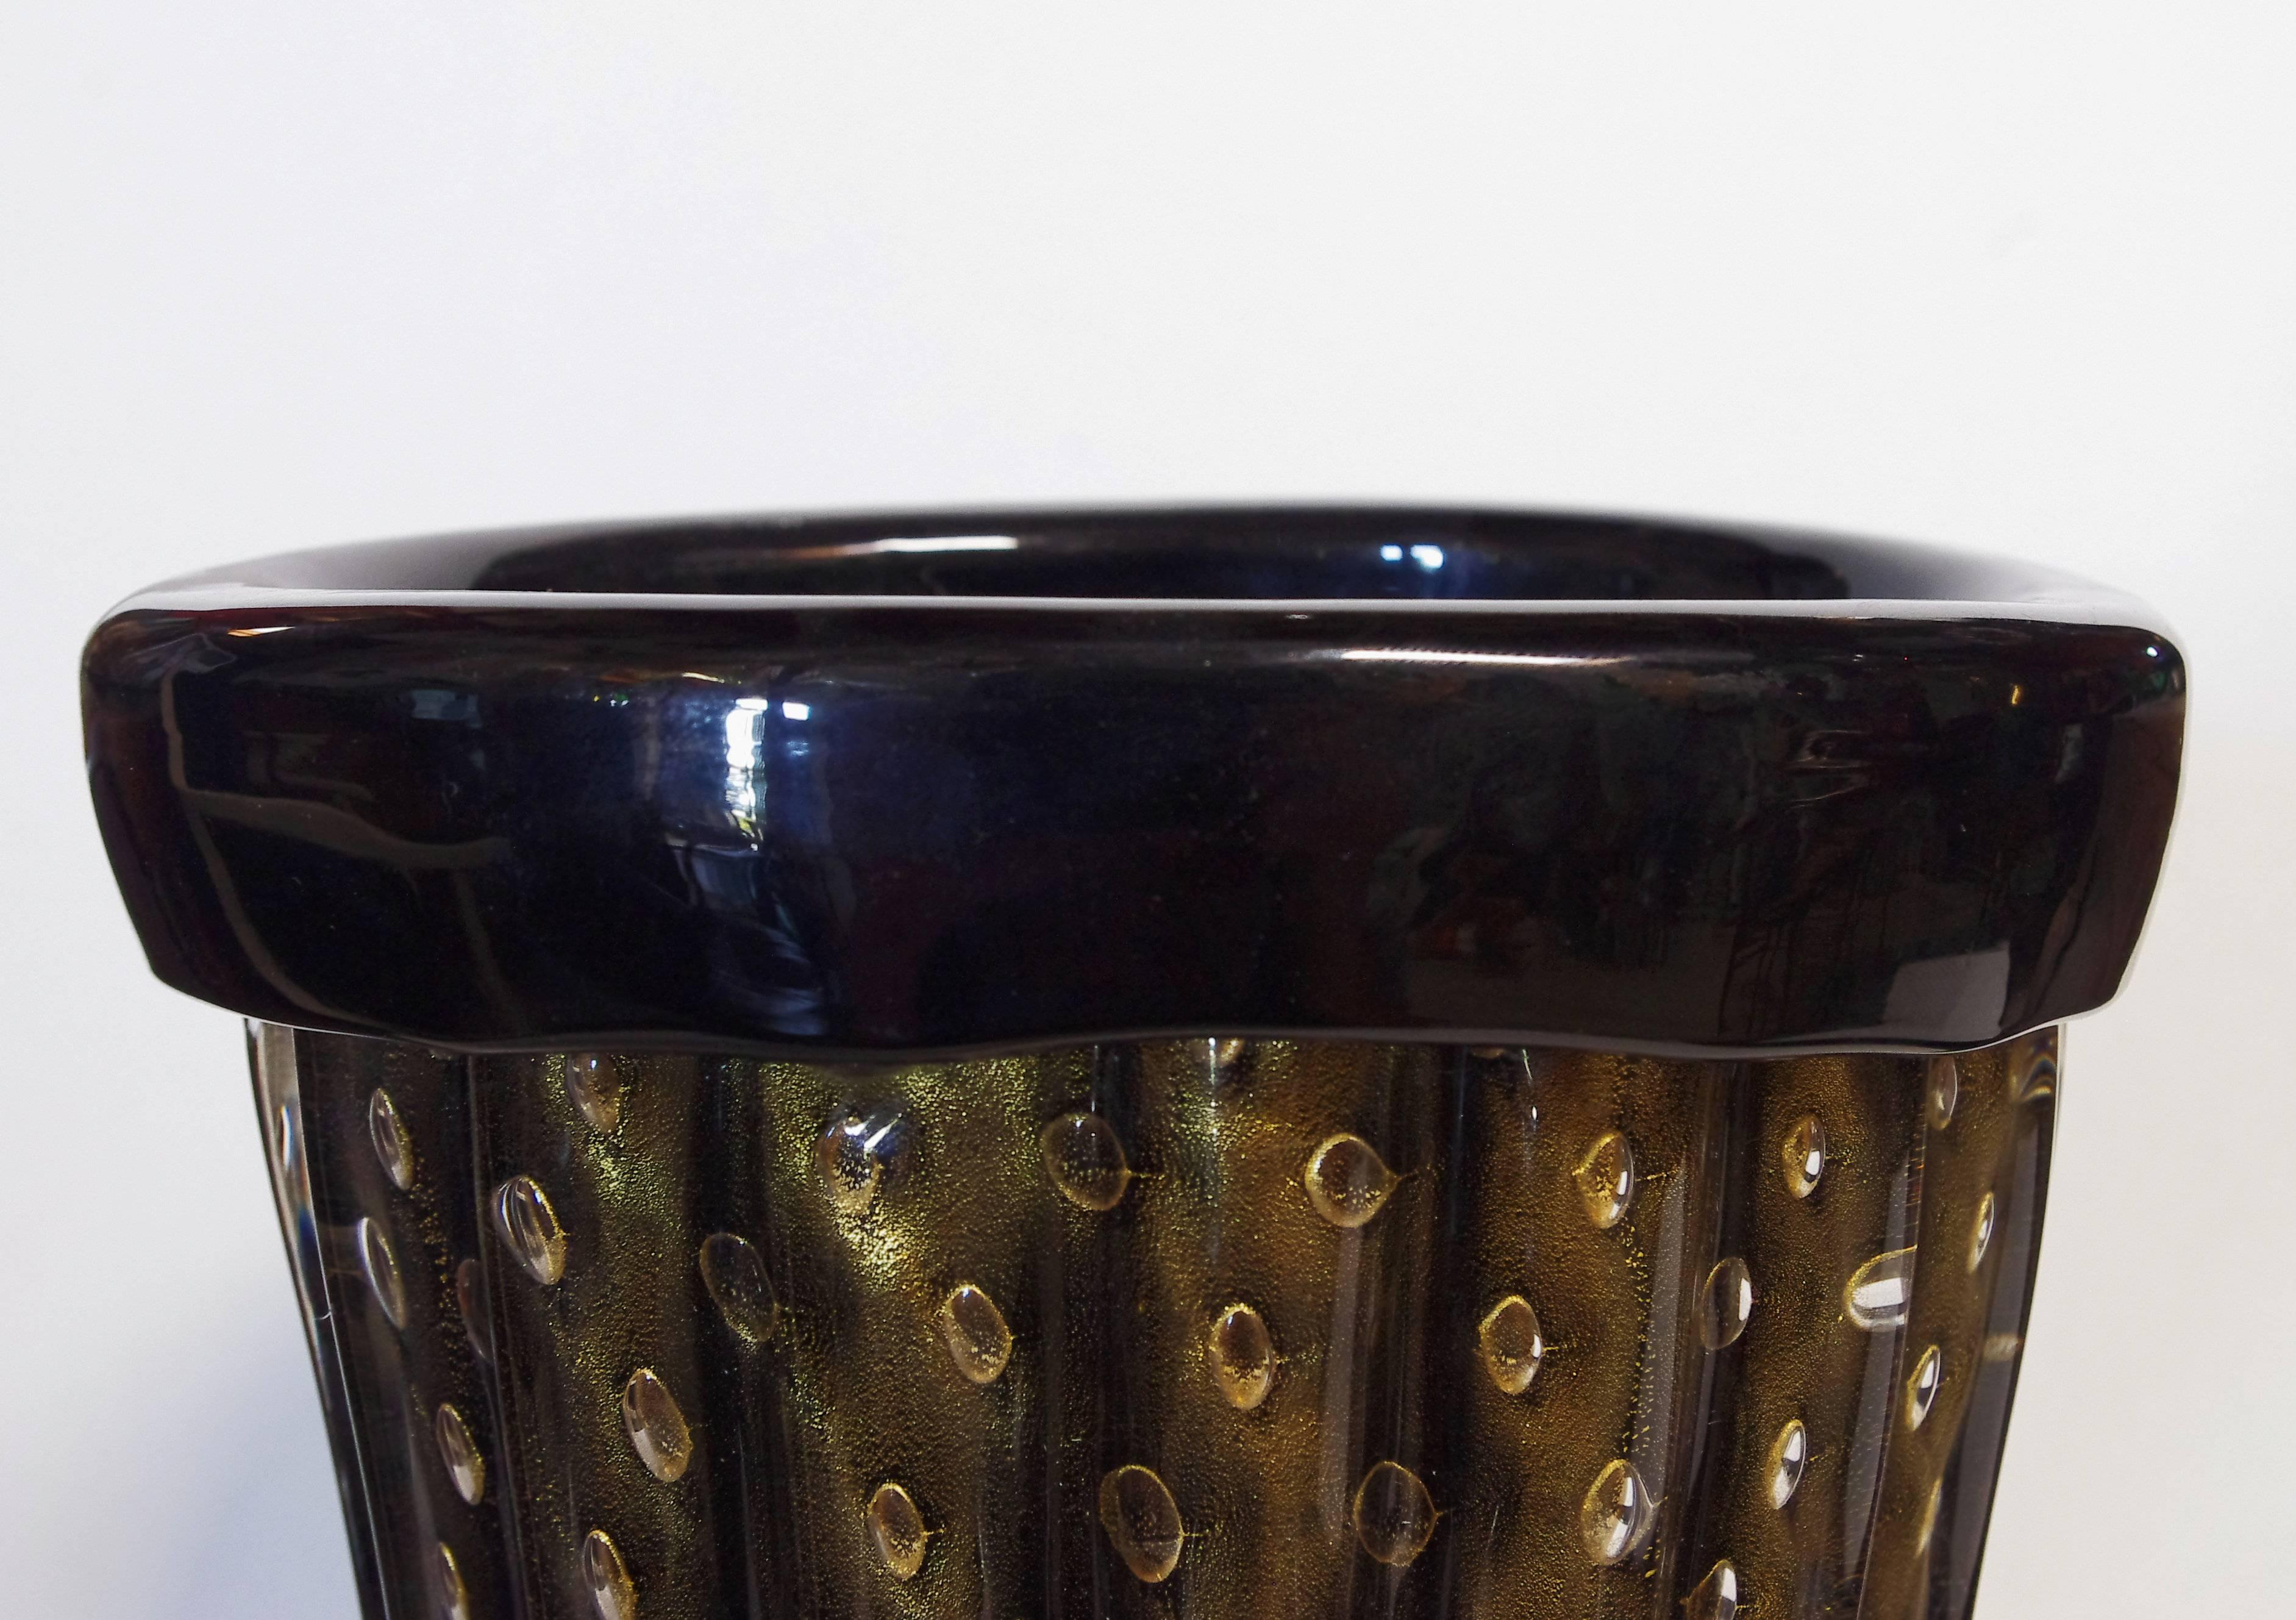 Vintage Italian black and gold Murano glass vases blown in Pulegoso technique by Pino Signoretto
Signed on the base / Made in Italy in the 1960s
Measures: Height 15 inches, width 8 inches, depth 7 inches
2 in stock in Palm Springs currently ON 40%